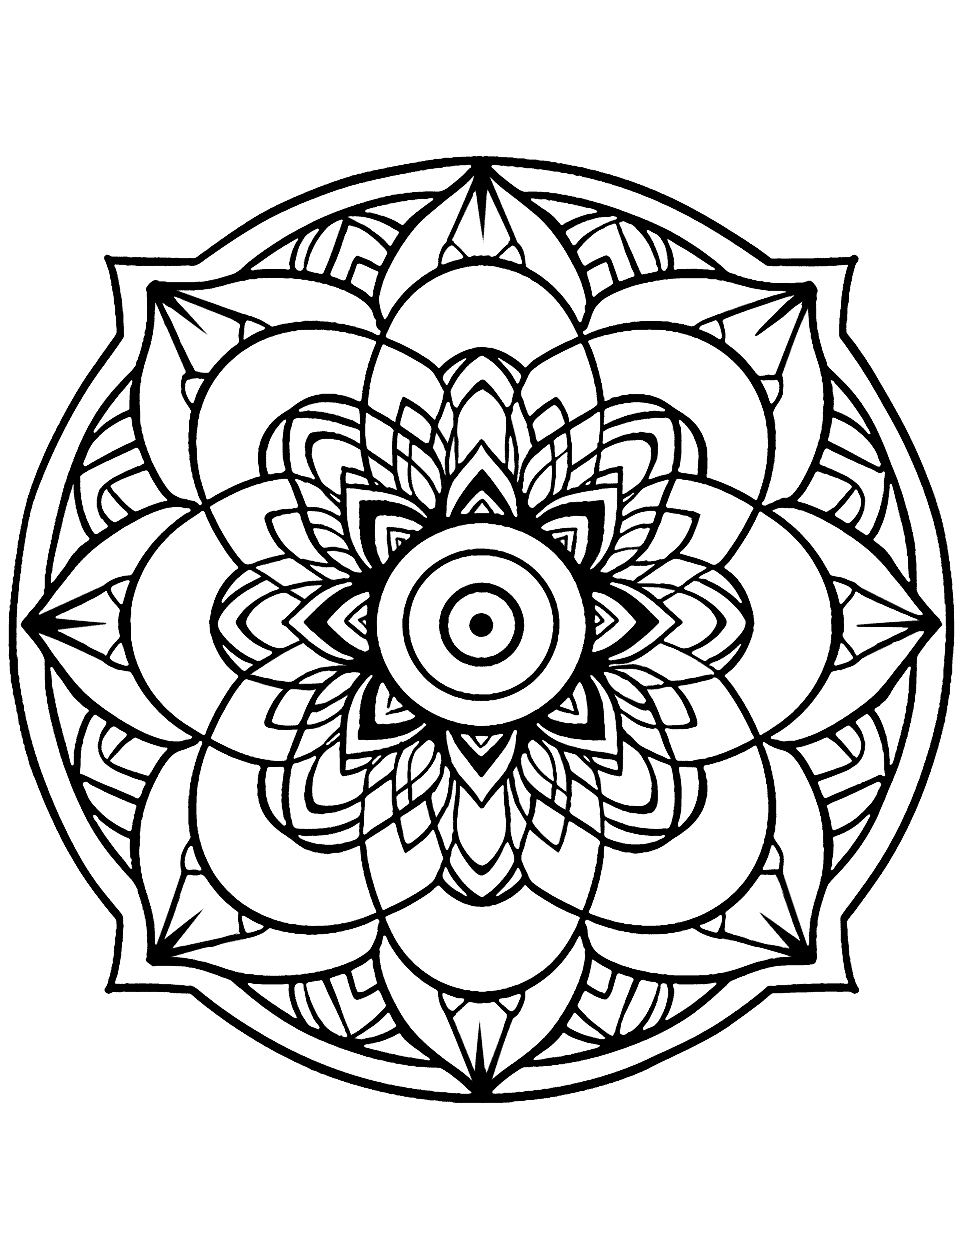 Heartfelt Mandala Coloring Page - A mandala designed with hearts, making it both easy and fun to color for kids, teaching them about love and compassion.